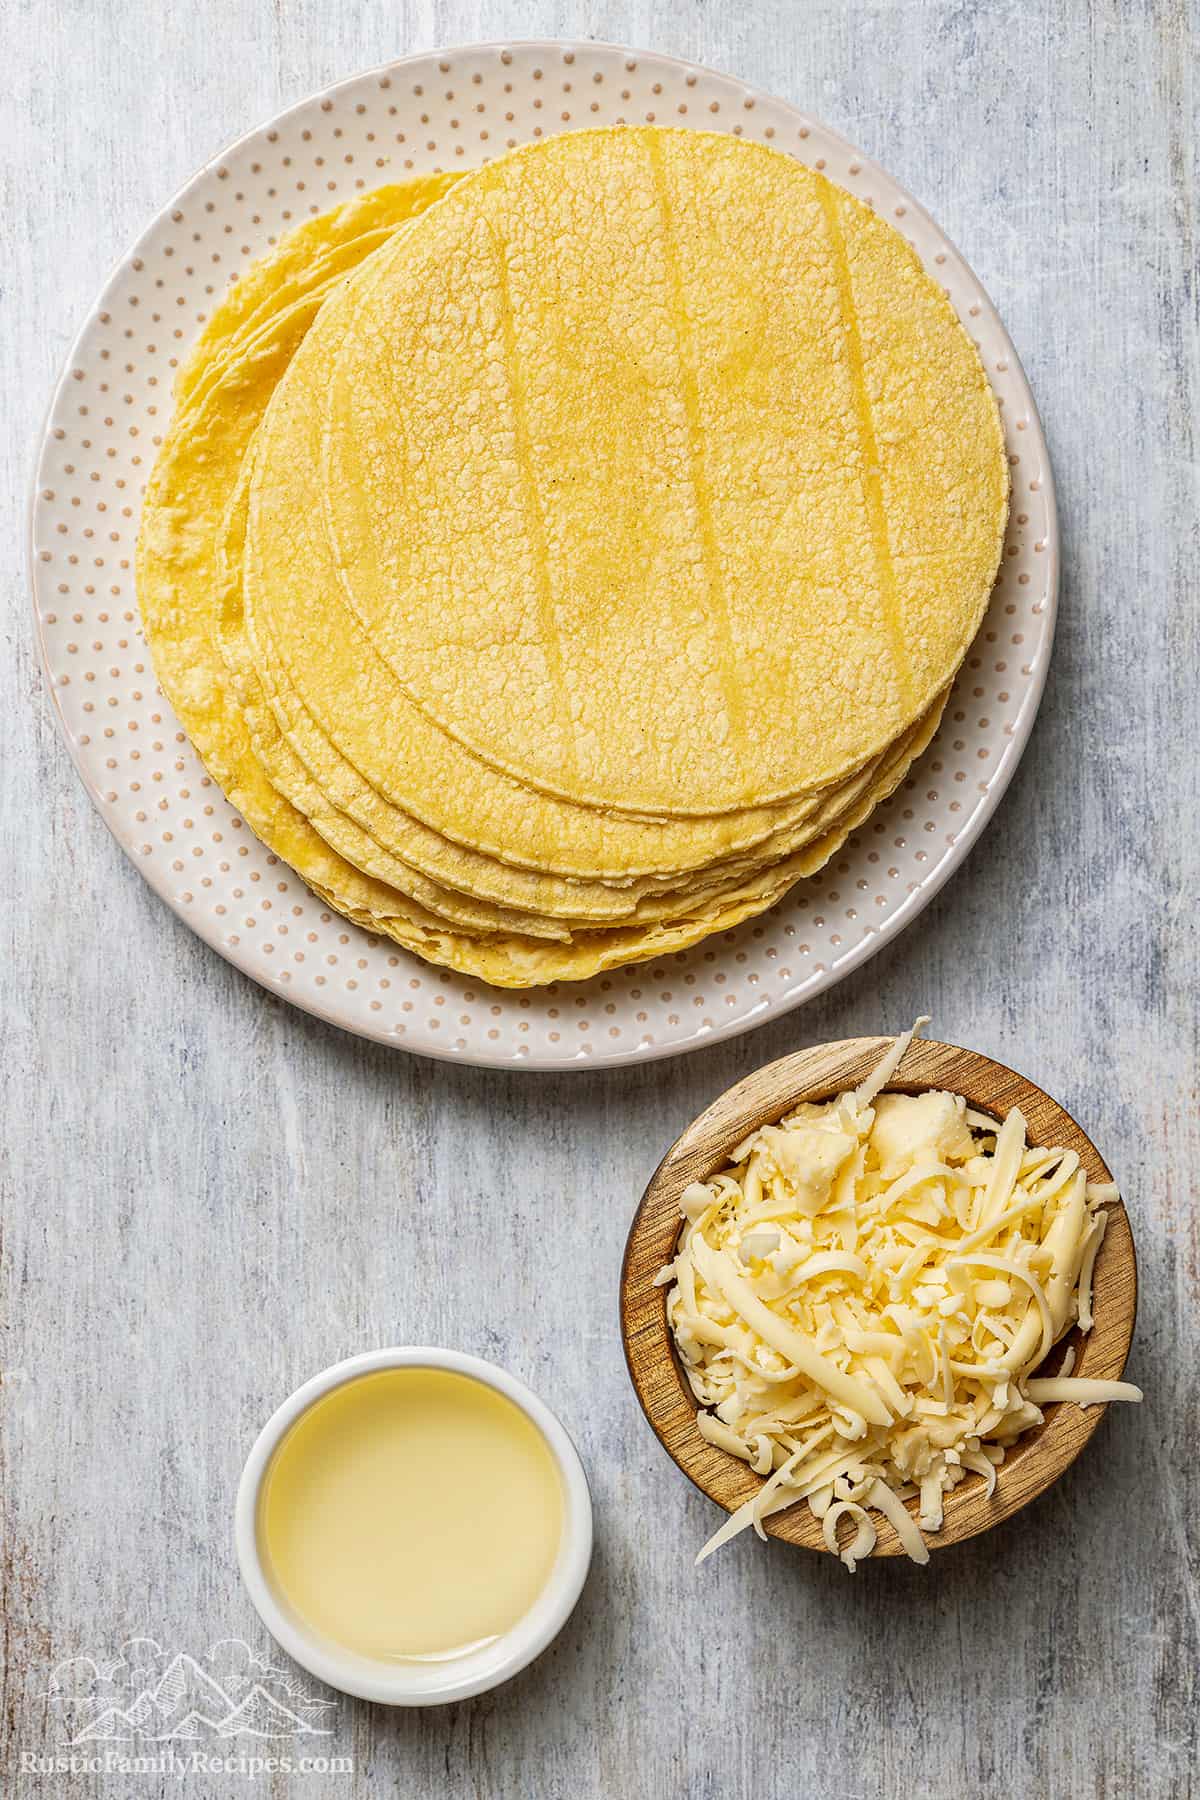 Corn tortillas on a plate next to a small bowl of shredded cheese and oil.